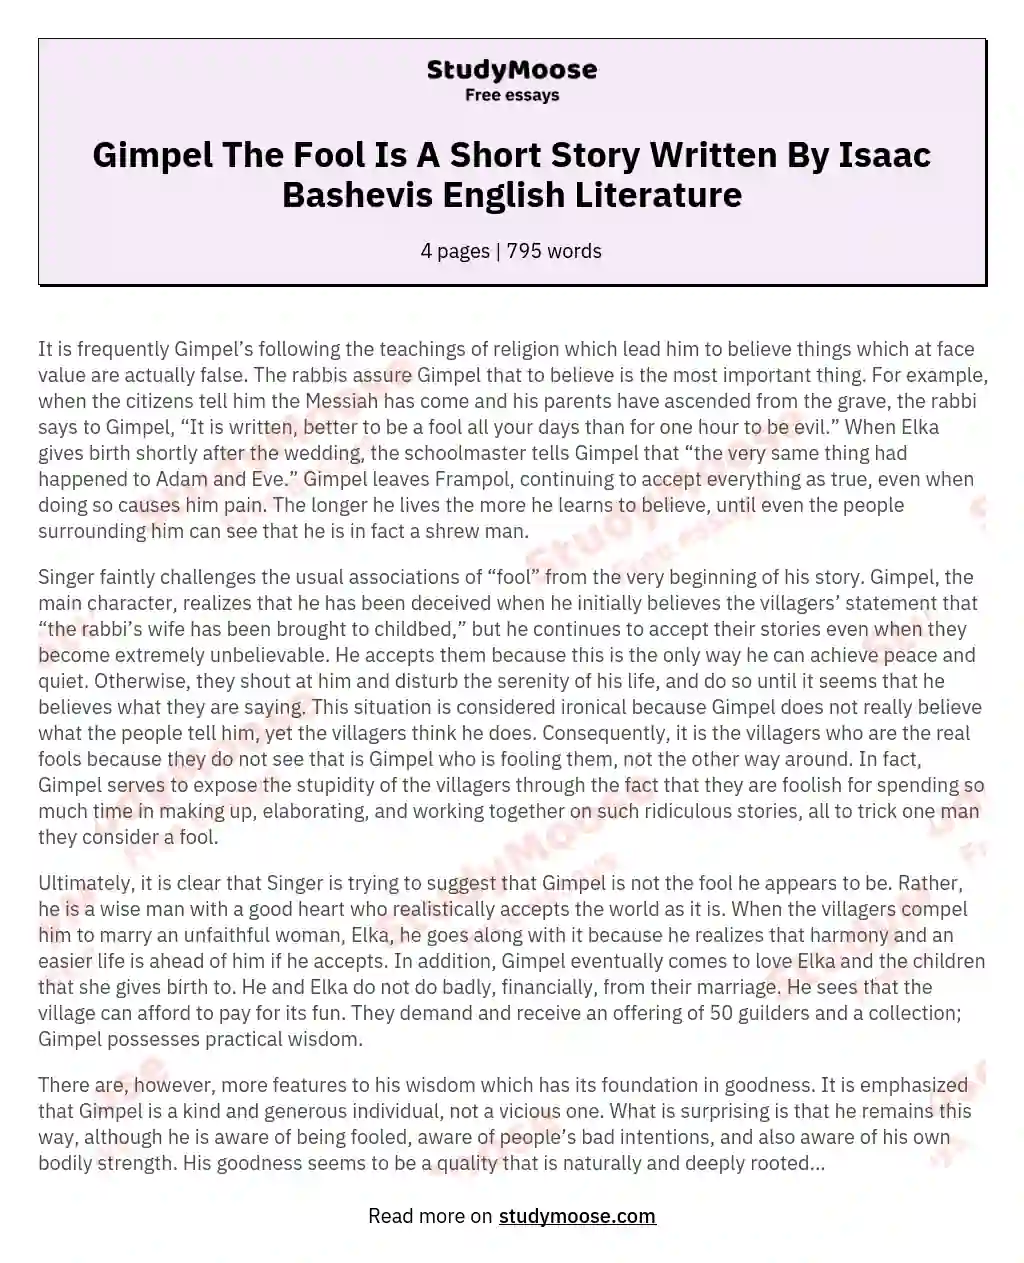 Gimpel The Fool Is A Short Story Written By Isaac Bashevis English Literature essay